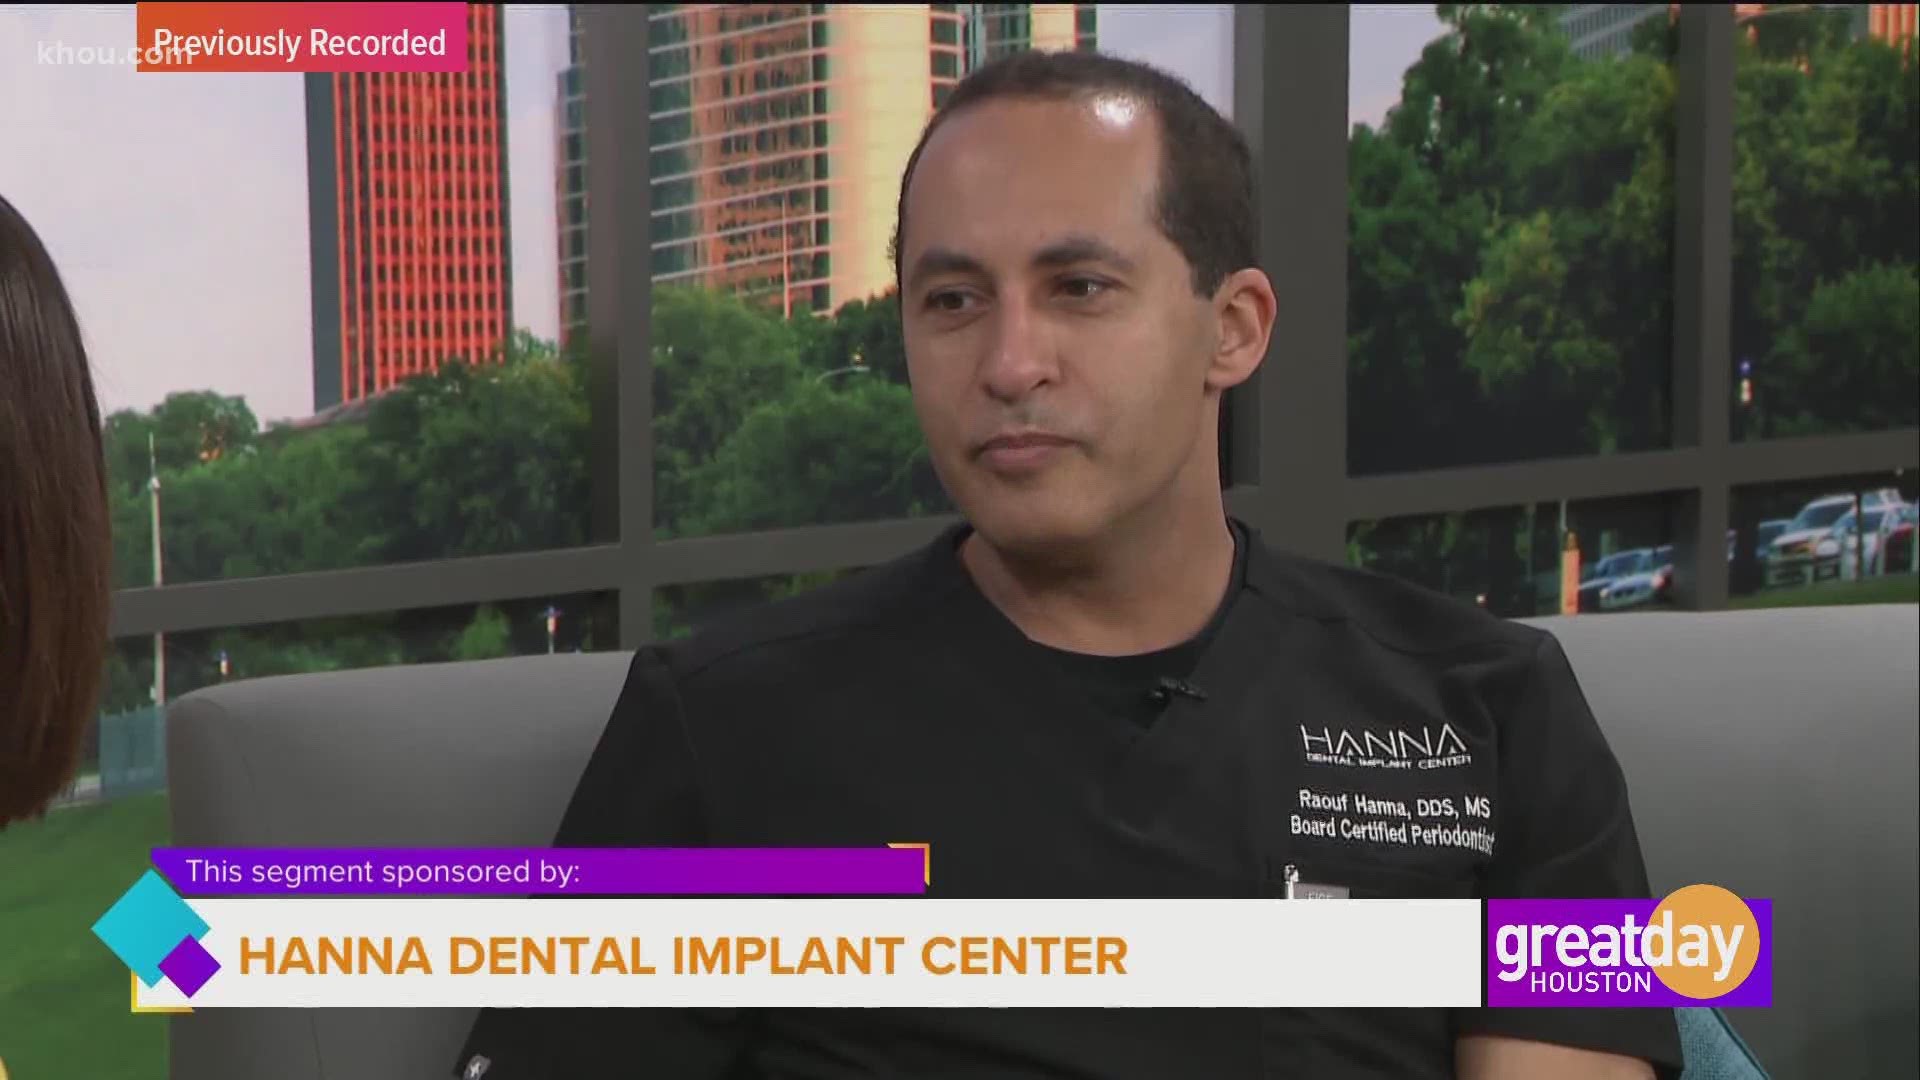 Dr. Raouf Hanna gave life-changing dental implants to James MacLeod through the Hanna Dental Implant Center